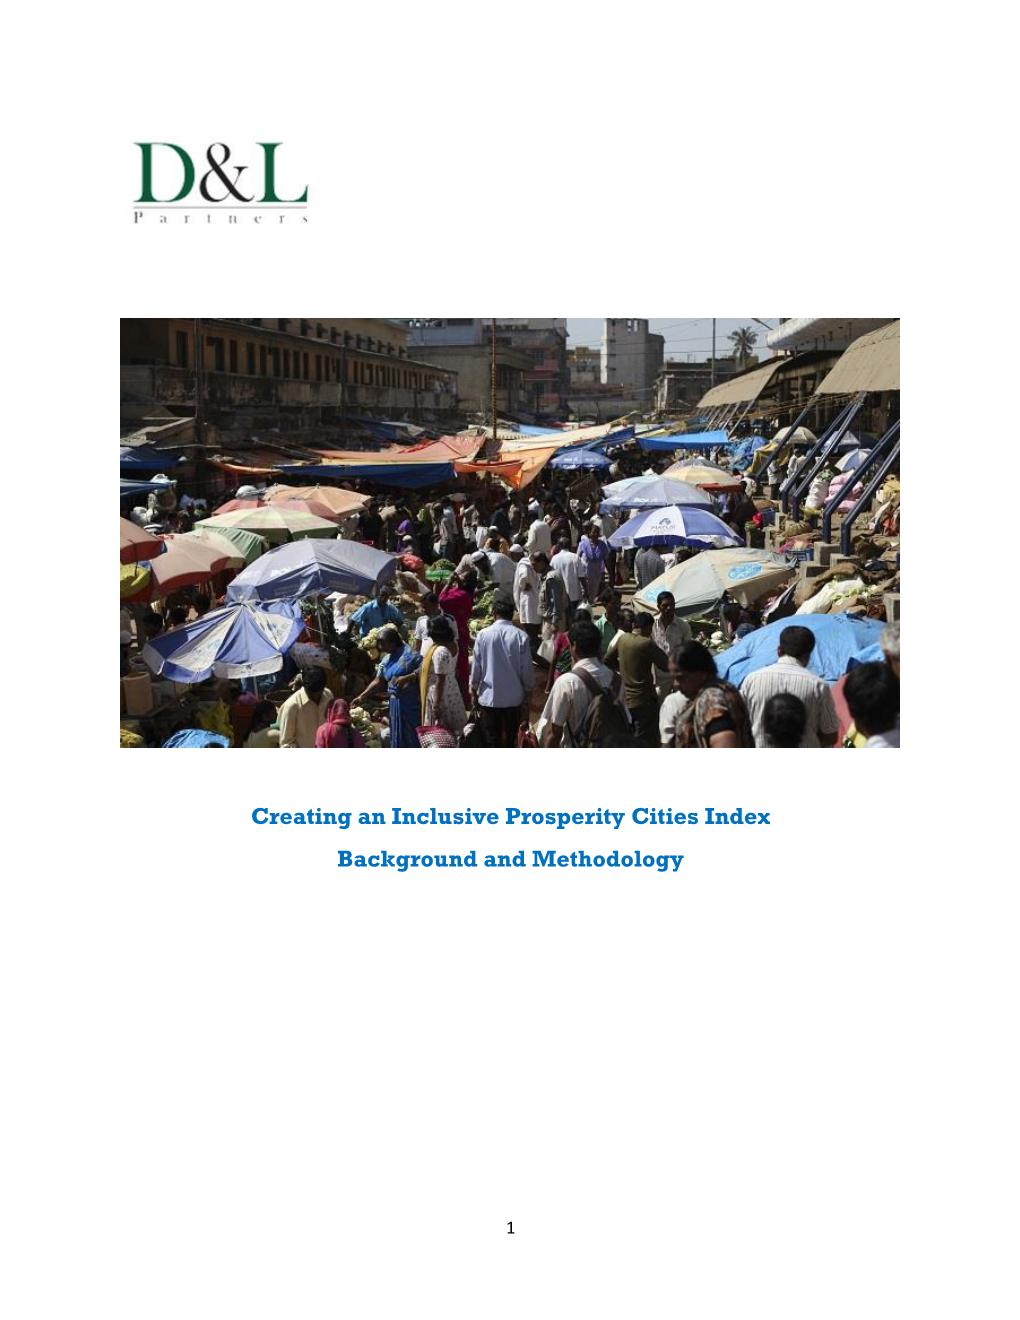 Creating an Inclusive Prosperity Cities Index Background and Methodology